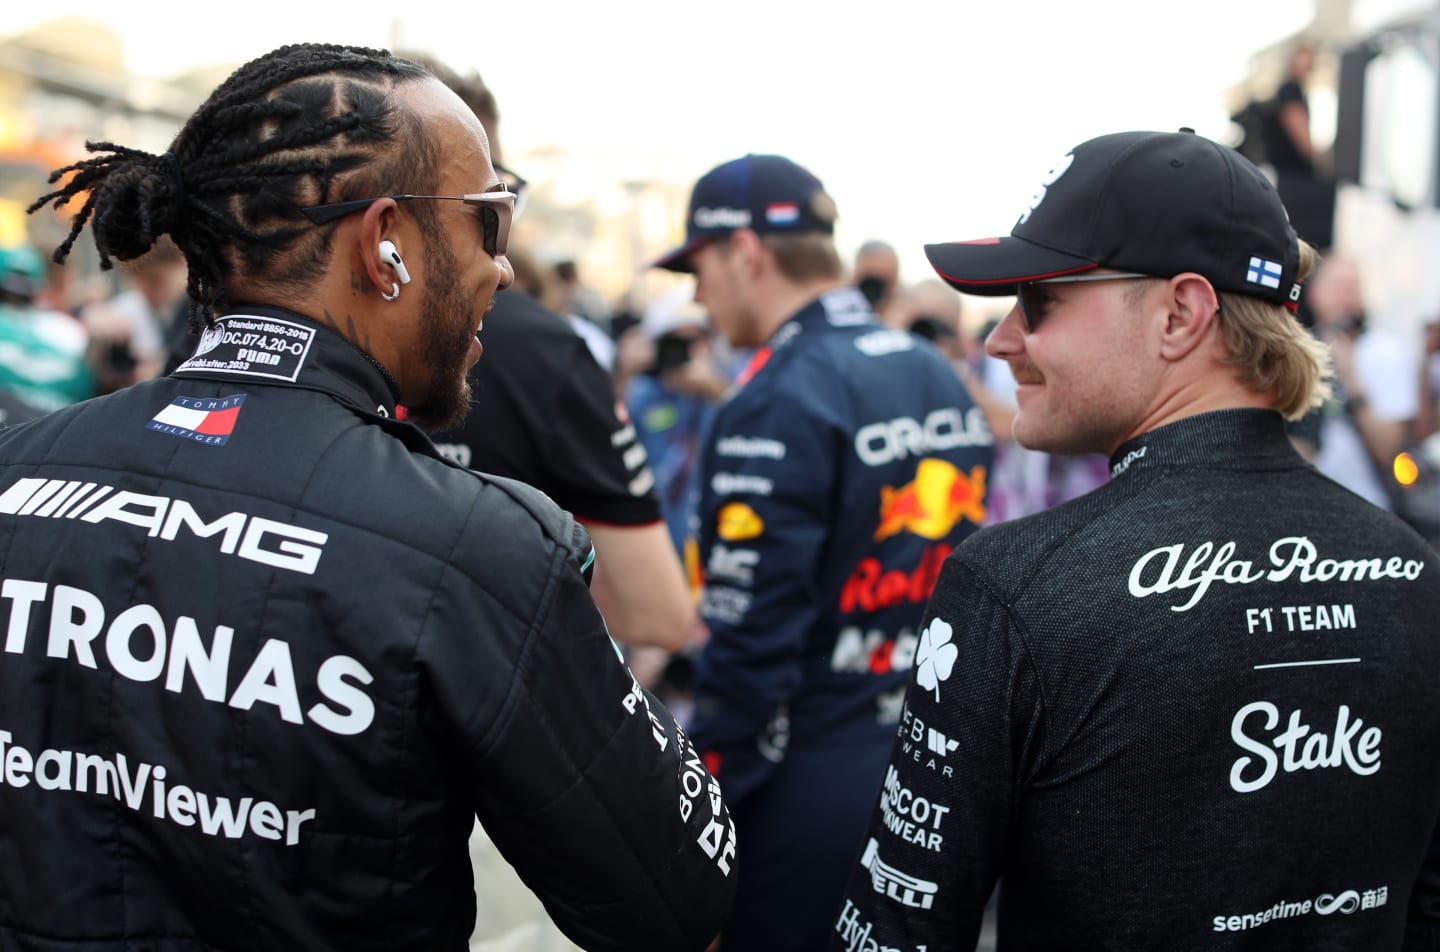 BAHRAIN, BAHRAIN - MARCH 05: Lewis Hamilton of Great Britain and Mercedes talks with Valtteri